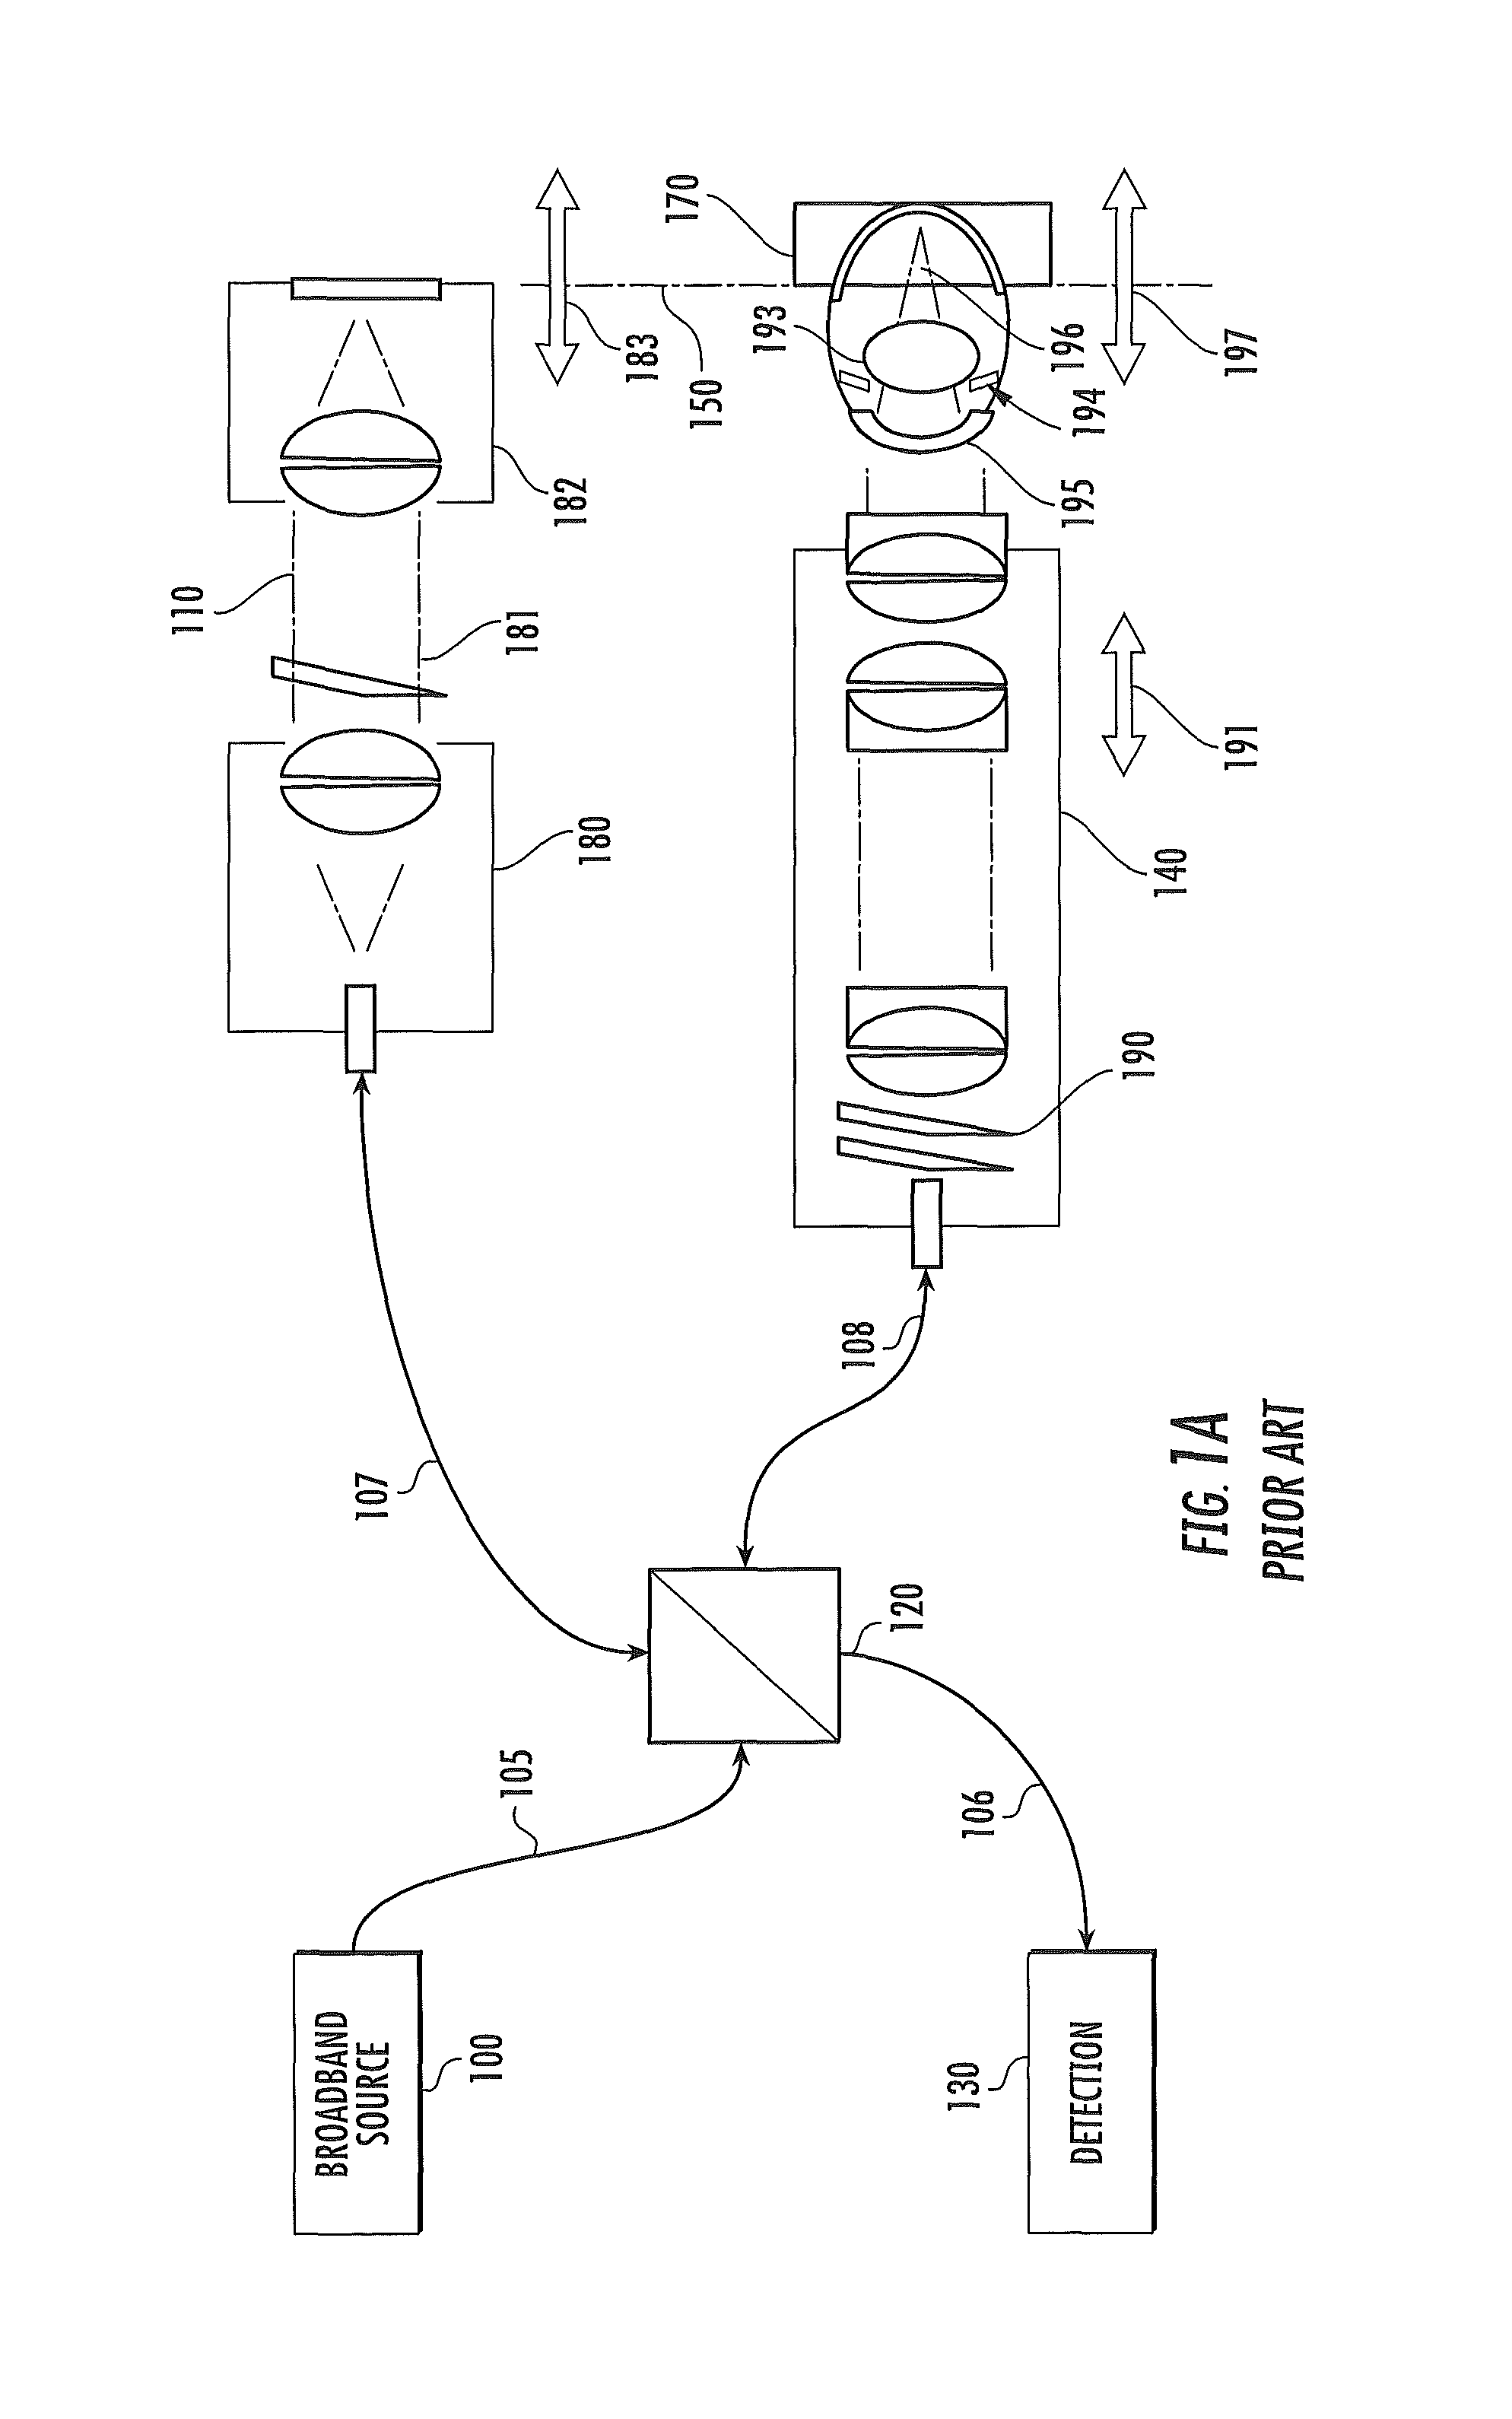 Surgical microscopes using optical coherence tomography and related methods